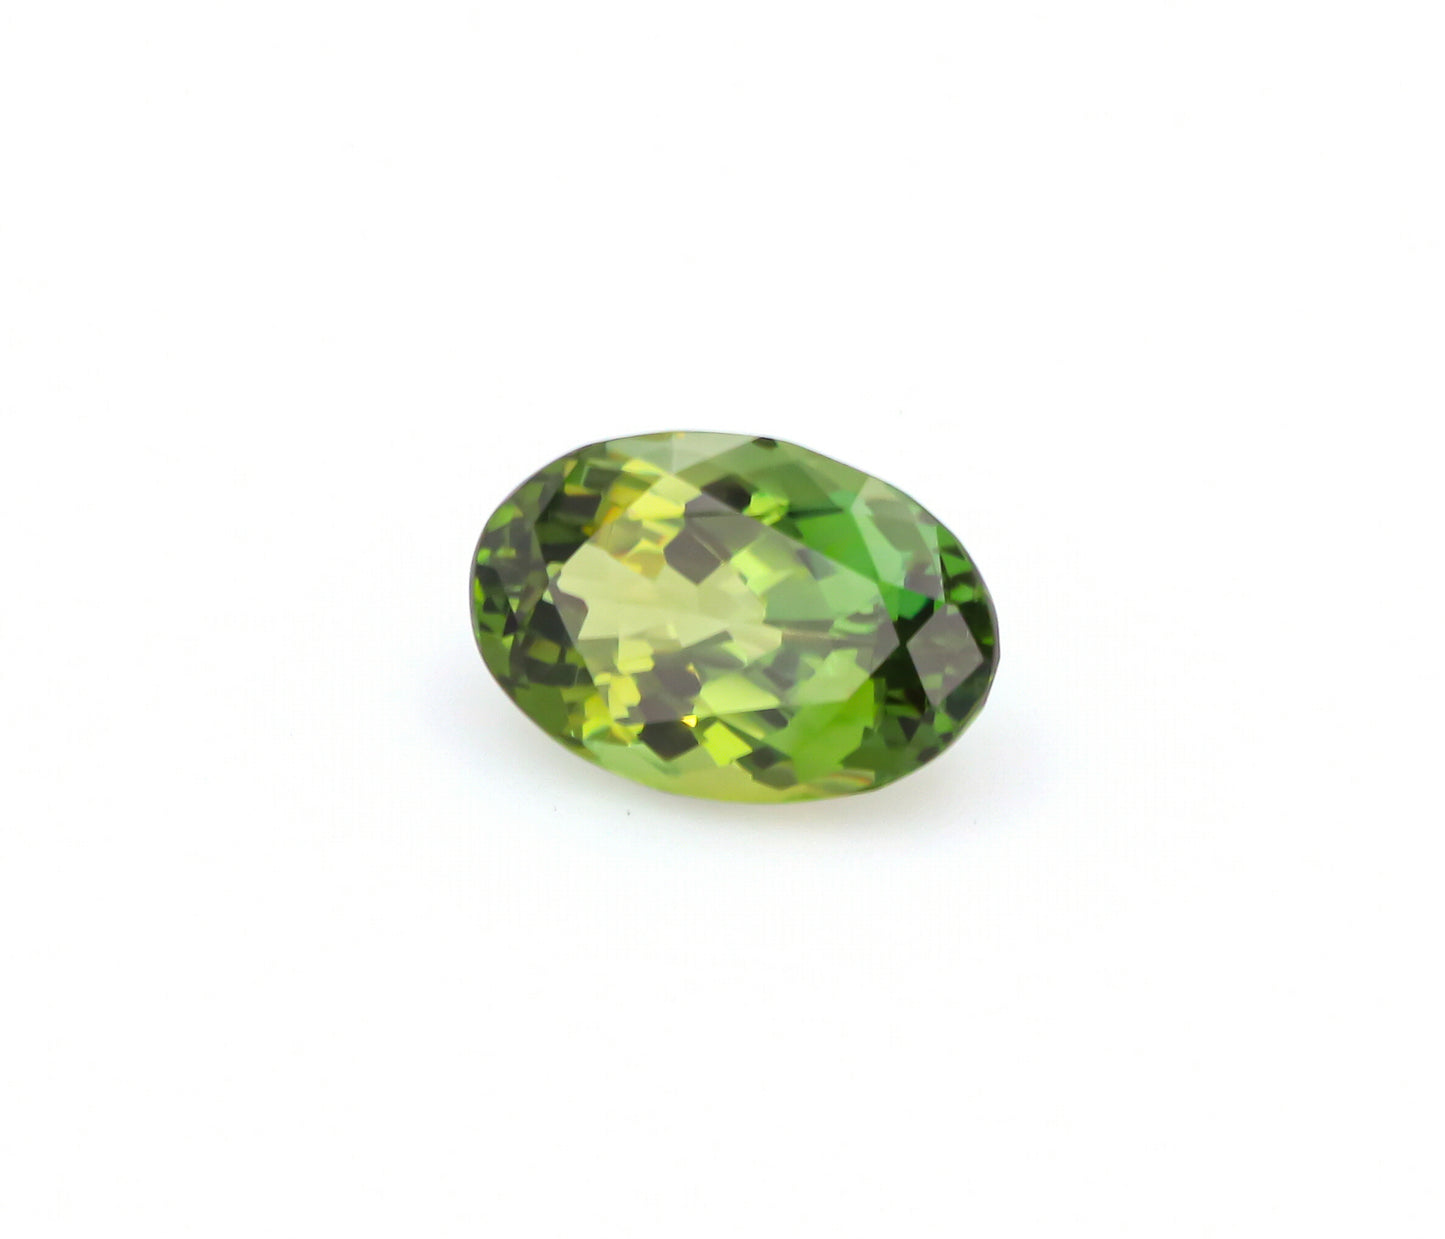 Natural Unheated Green Zoisite 4.76 Carats With AGL Report